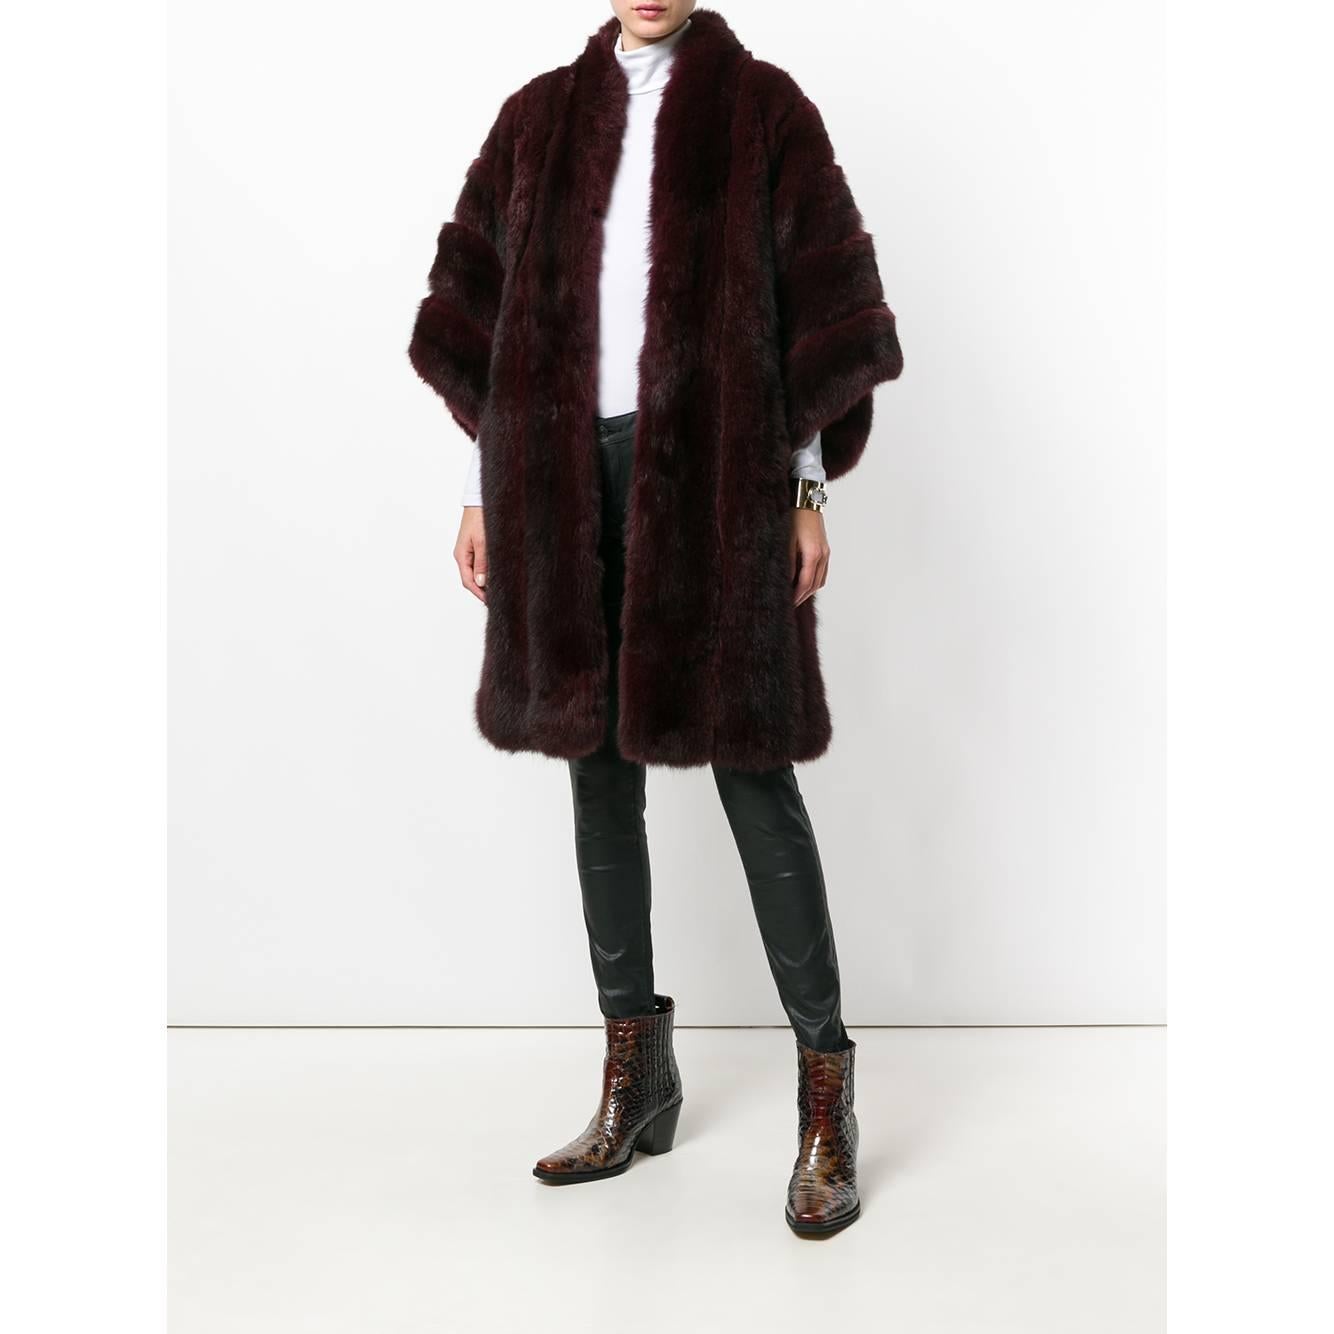 Christian Dior burgundy pine marten fur coat. Model with V-neck, front closure with hook and wide sleeves.

Size: 44 IT

Flat Measurements
Height: 95 cm
Bust: 53 cm
Shoulders: 40 cm
Sleeves: 40 cm

Product code: A5796

Notes: Please note this item